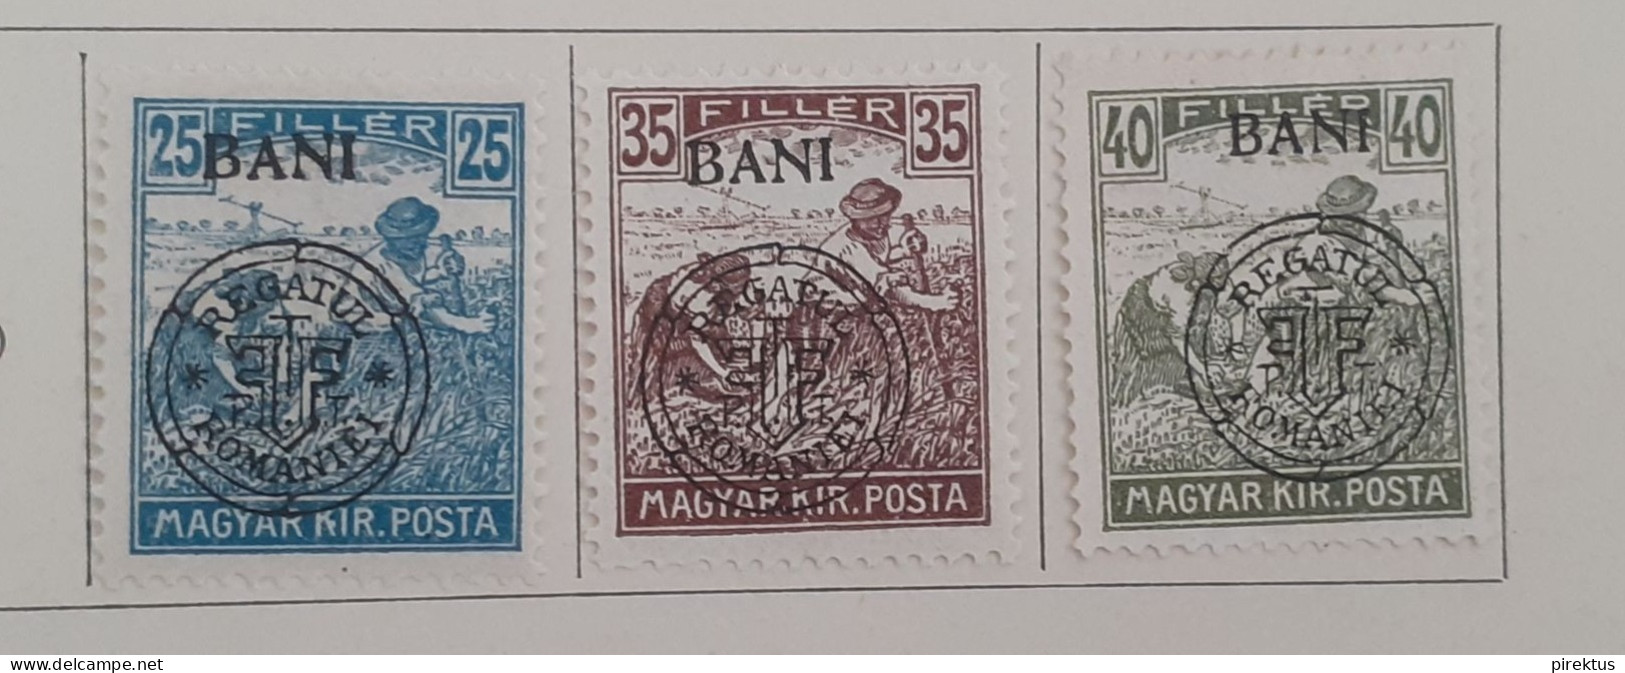 Romania 1913-1920 stamps lot